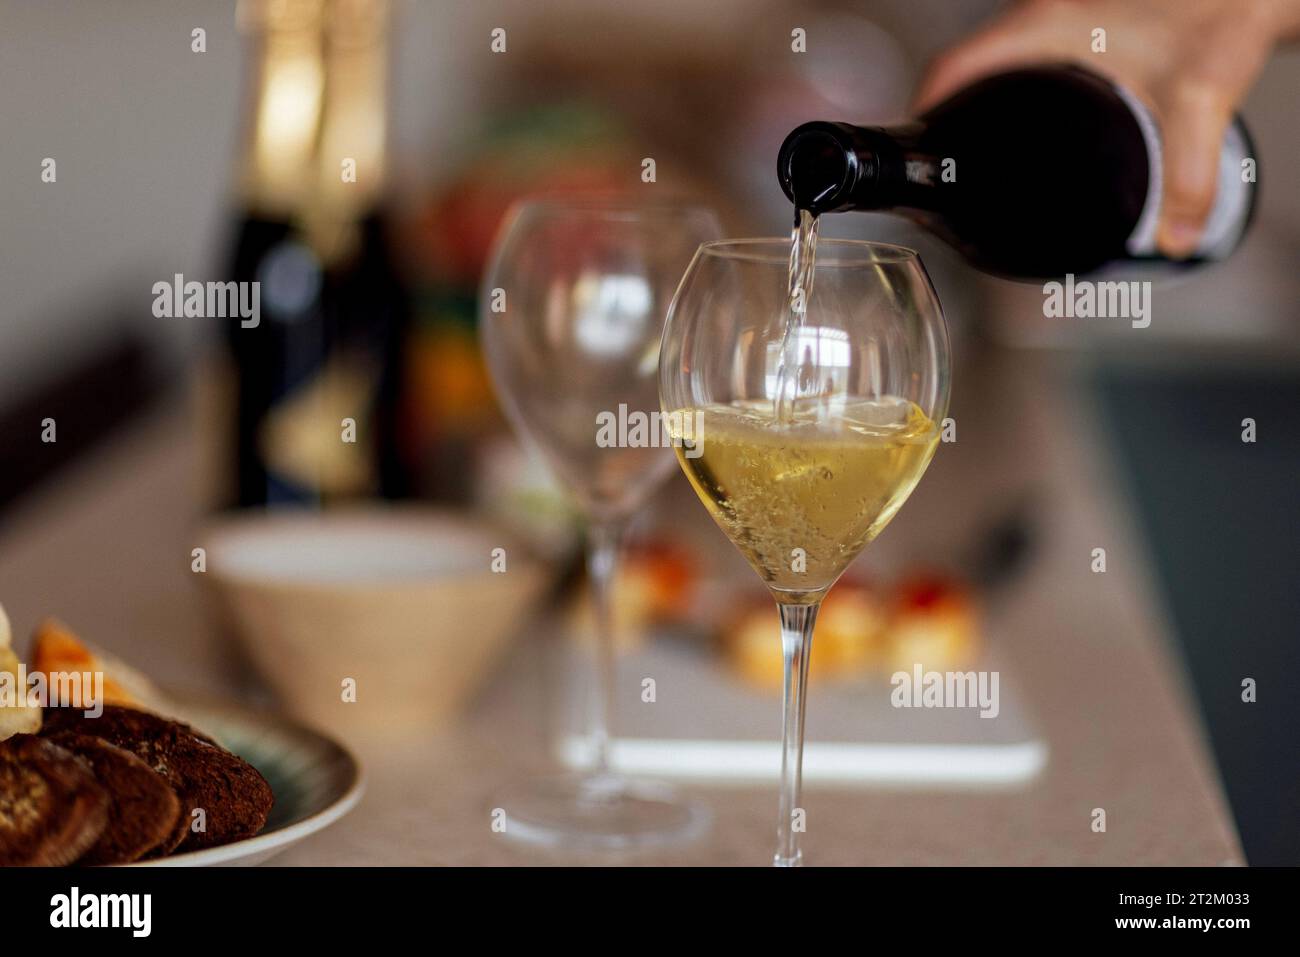 Close-up of an elegant glass with a long stem with champagne. The process of pouring sparkling wine into a goblet. Bottles of wine, plates with snacks Stock Photo